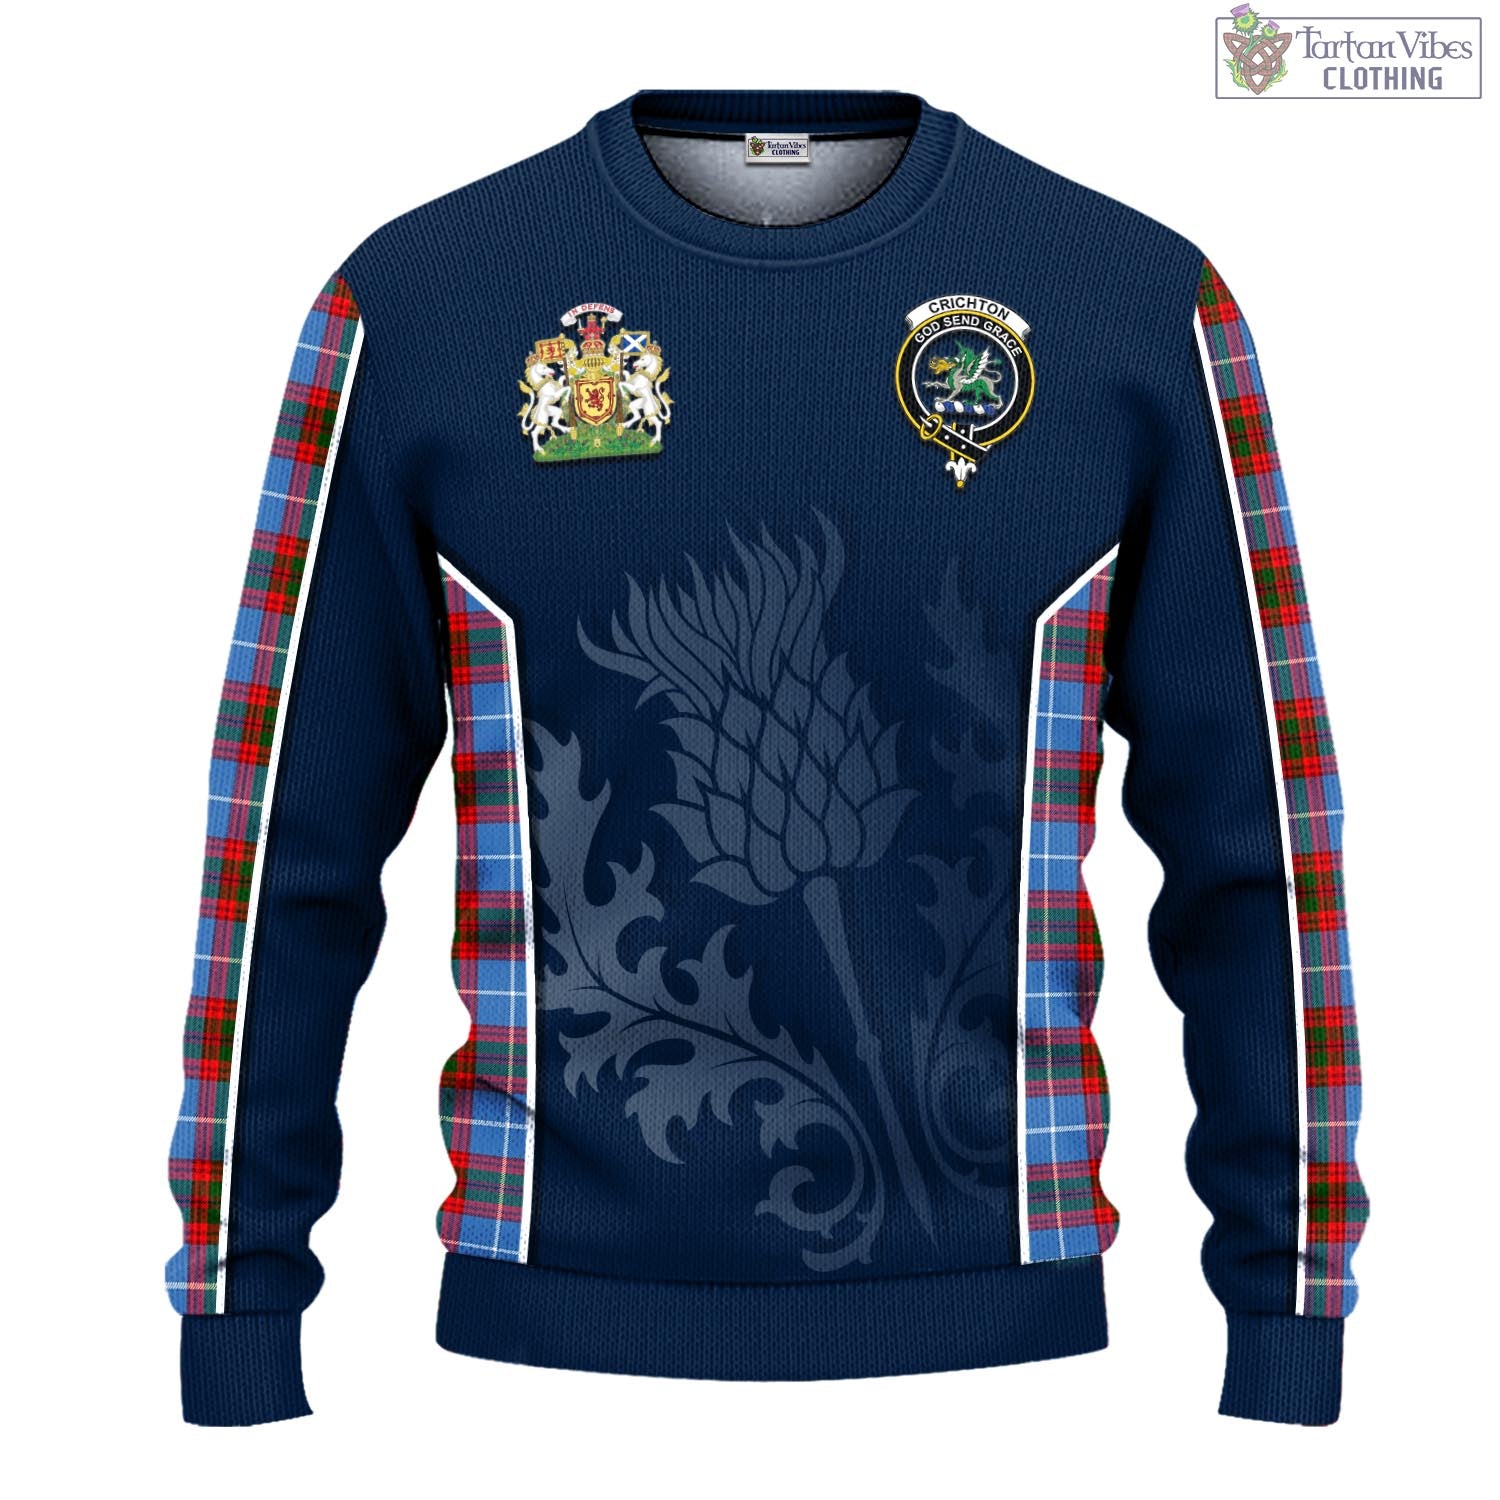 Tartan Vibes Clothing Crichton Tartan Knitted Sweatshirt with Family Crest and Scottish Thistle Vibes Sport Style